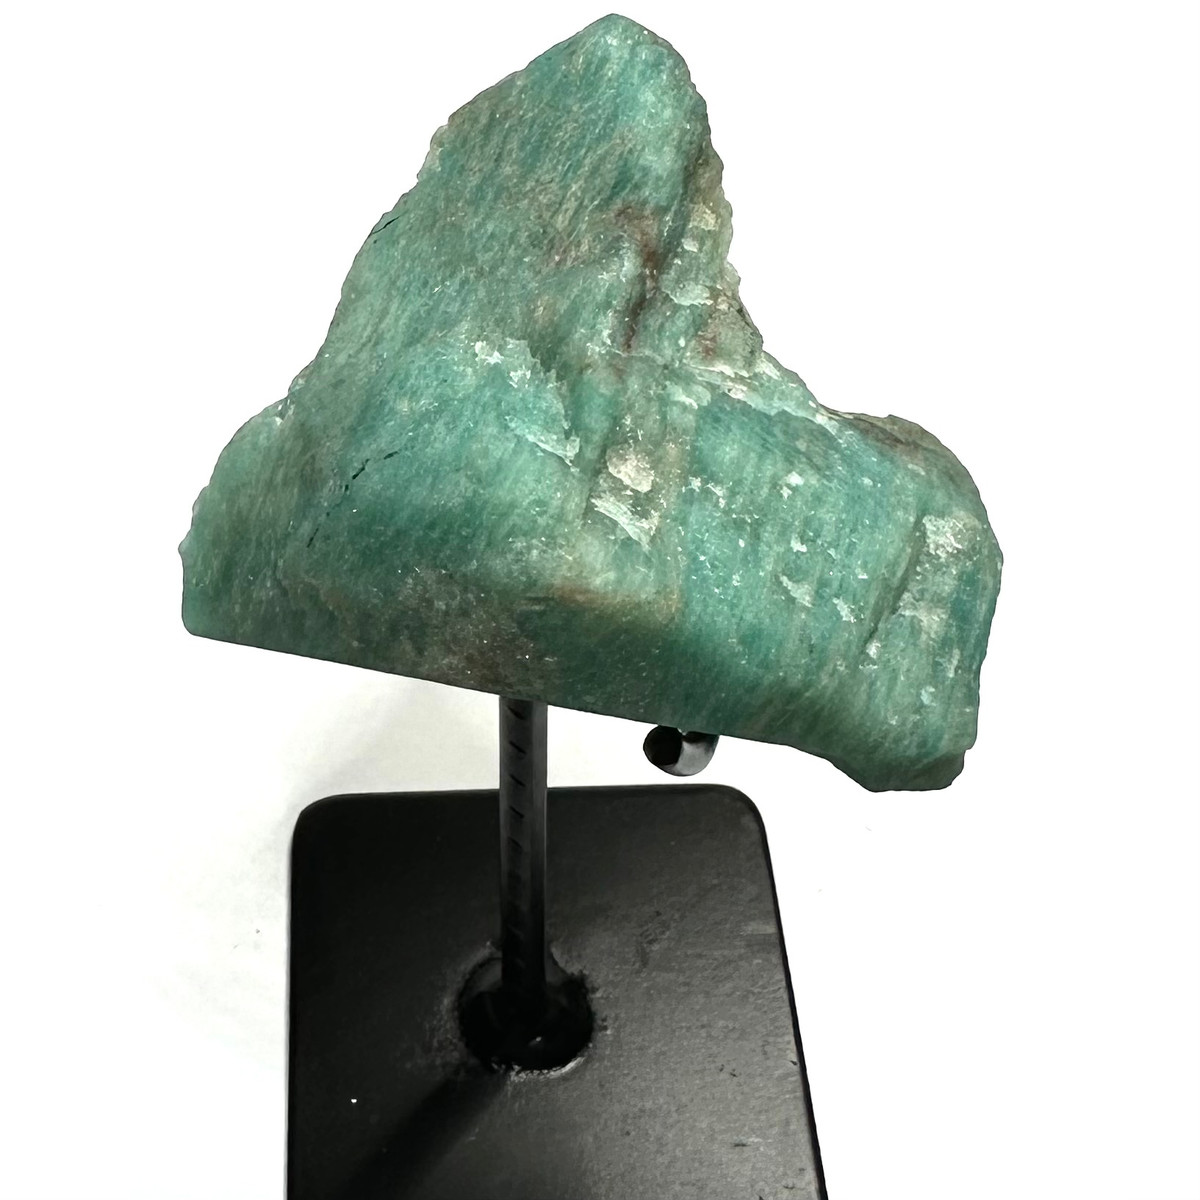 One of a Kind Amazonite Rough Cut Stone on a 3 1/4" Stand-2 1/4 x 2"